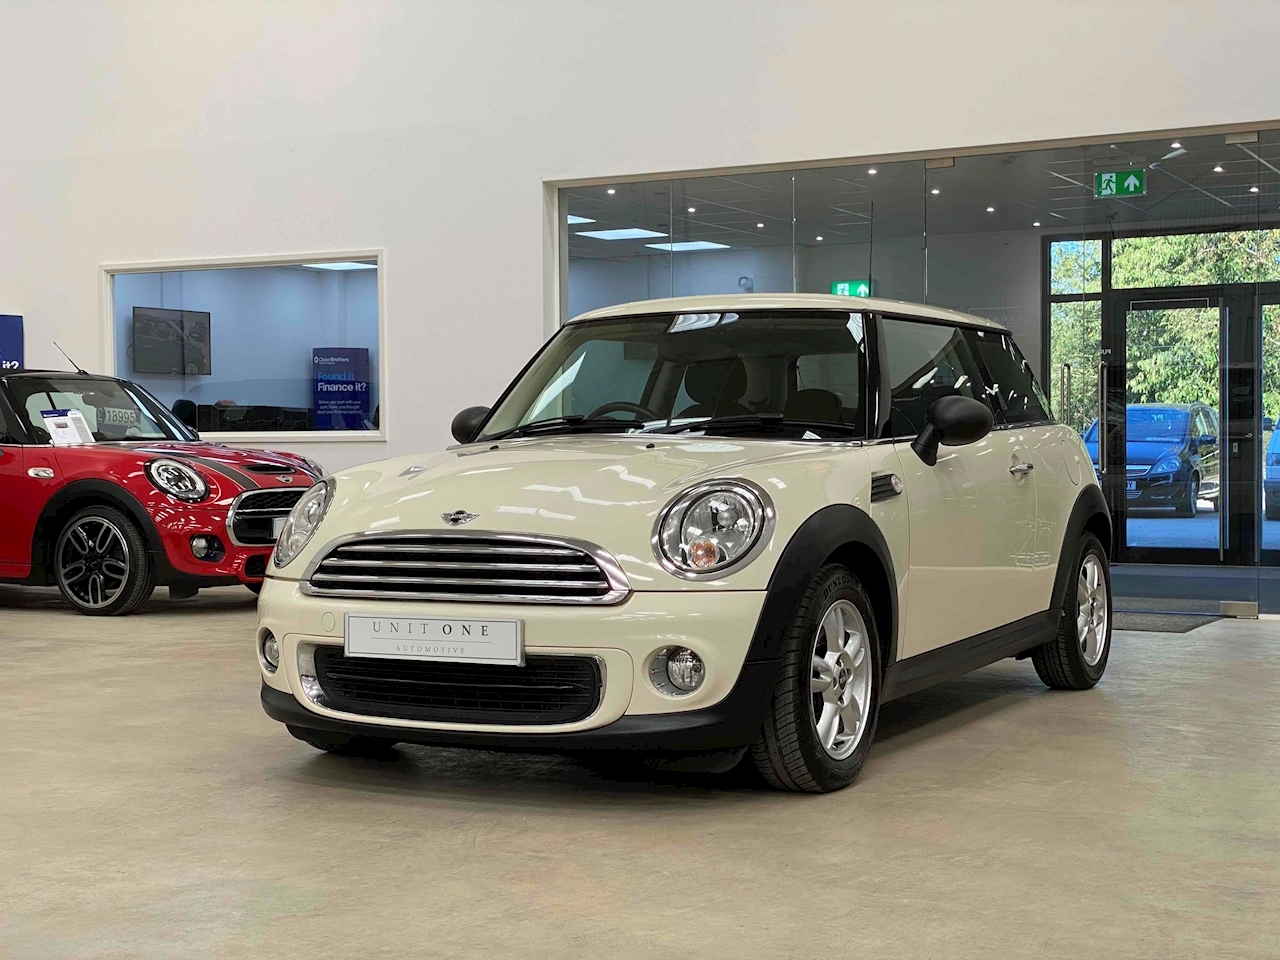 Used 2013 MINI 1.6 One (Sport Chili) Hatchback 3dr Petrol Manual (127 g/km,  98 bhp) For Sale in West Sussex